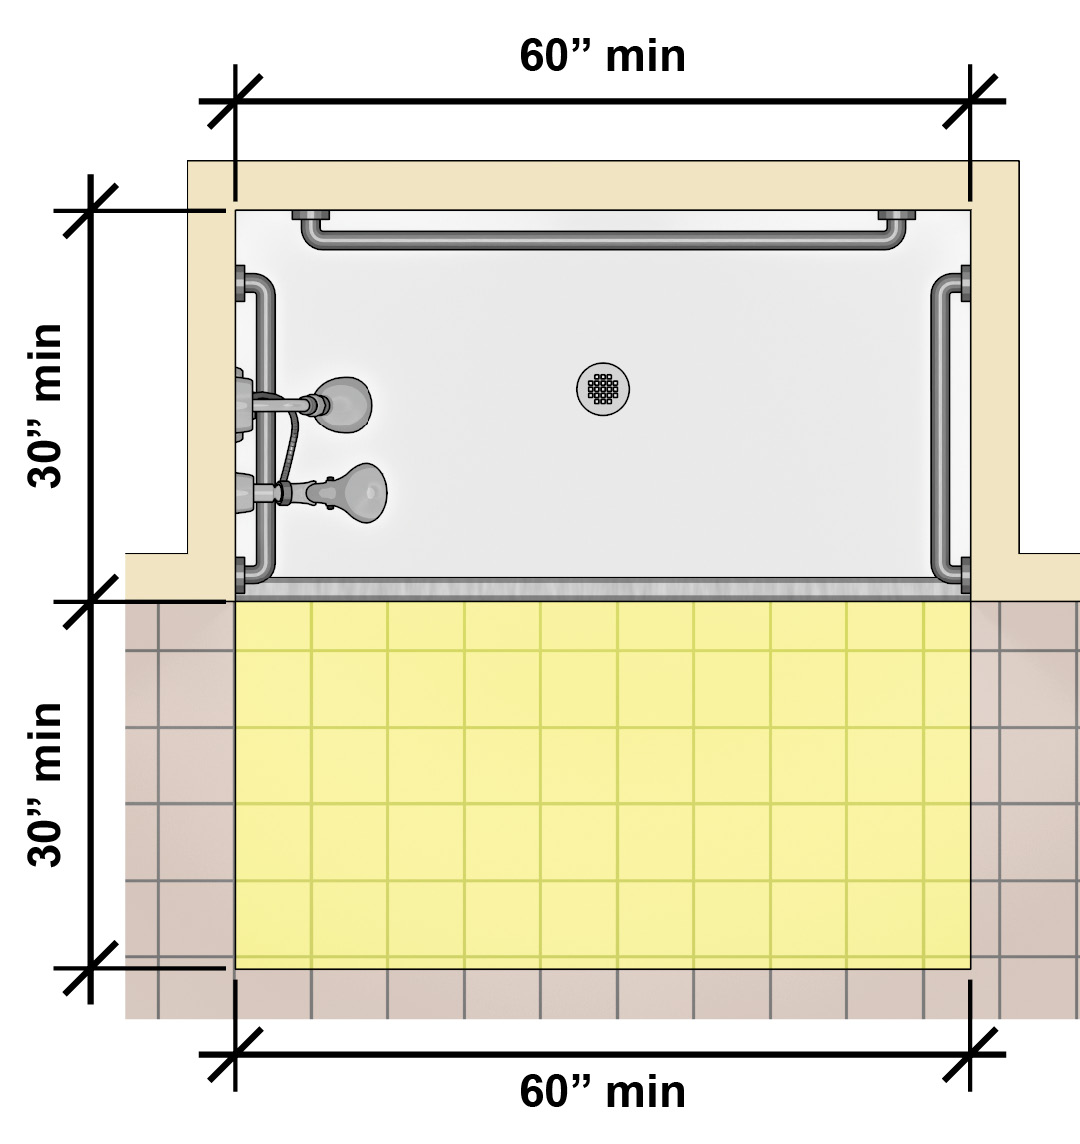 Standard roll-in shower 30 inches deep minimum and 60 inches wide minimum with clearance in front of the opening that is 30 inches deep minimum and 60 inches wide minimum.